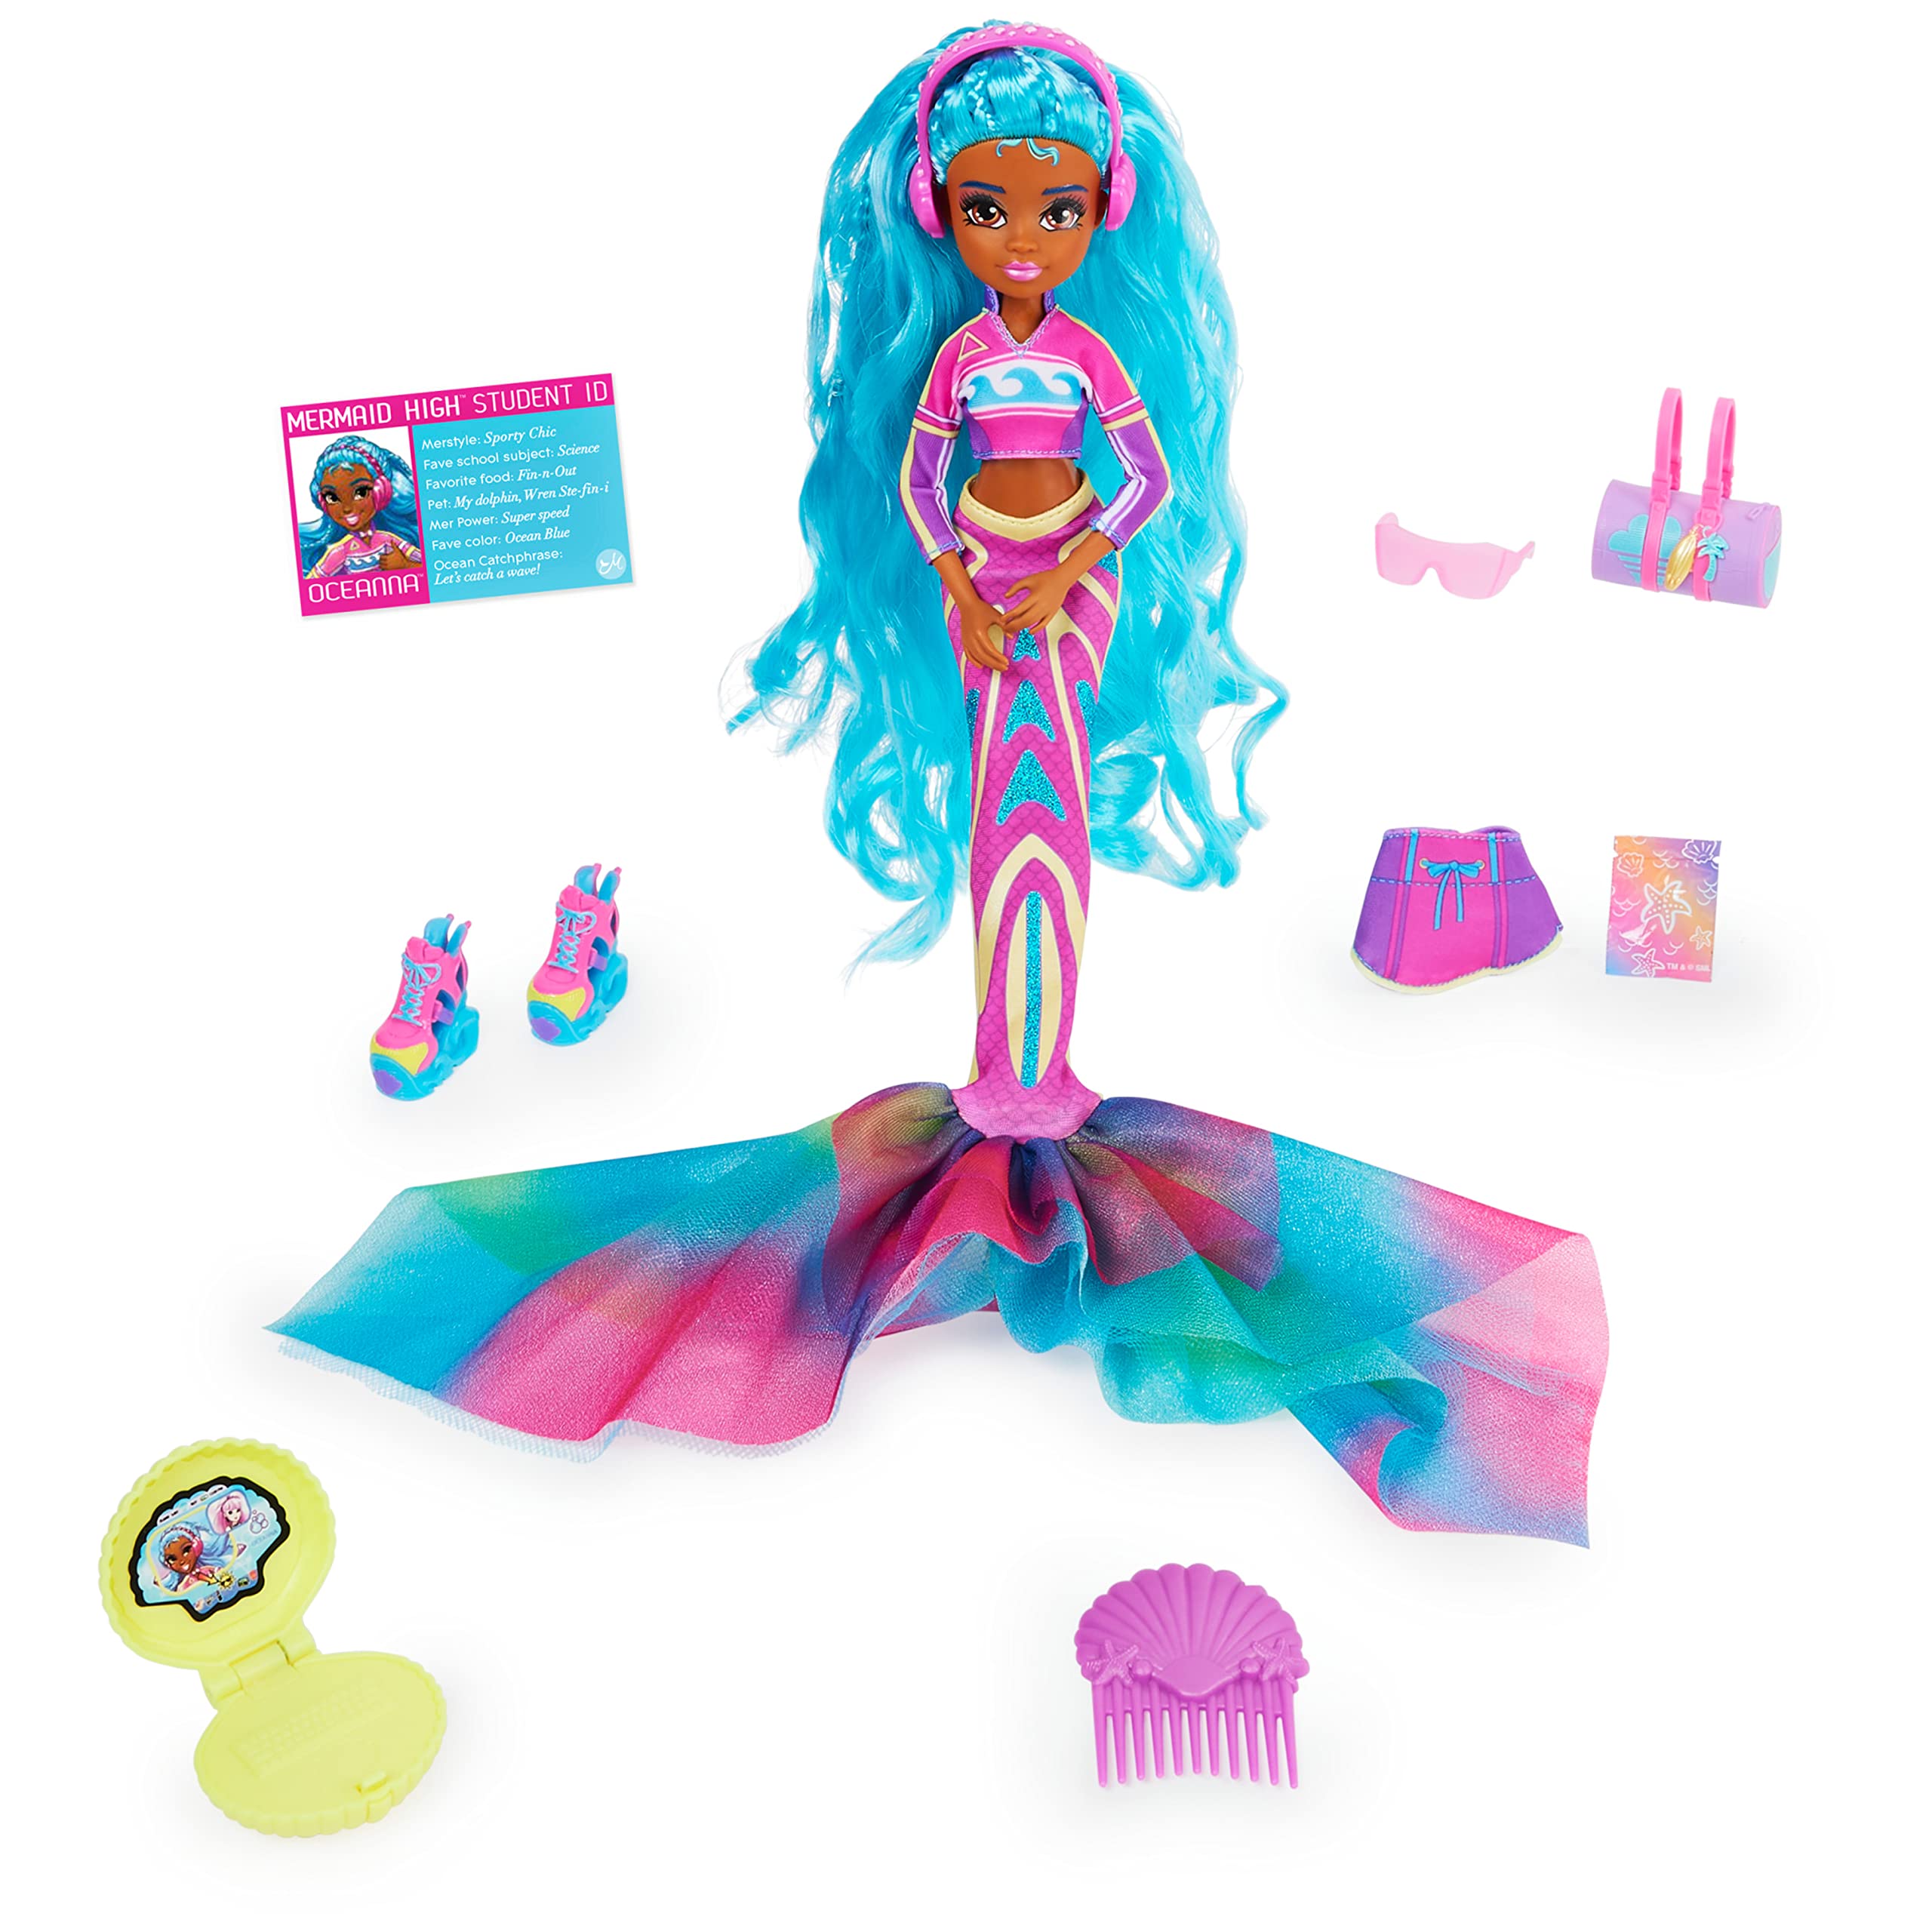 10.5" Mermaid High Oceanna Deluxe Mermaid Doll w/ Removable Tail & Fashion Accessories $6.66 + Free Shipping w/ Prime or on $35+